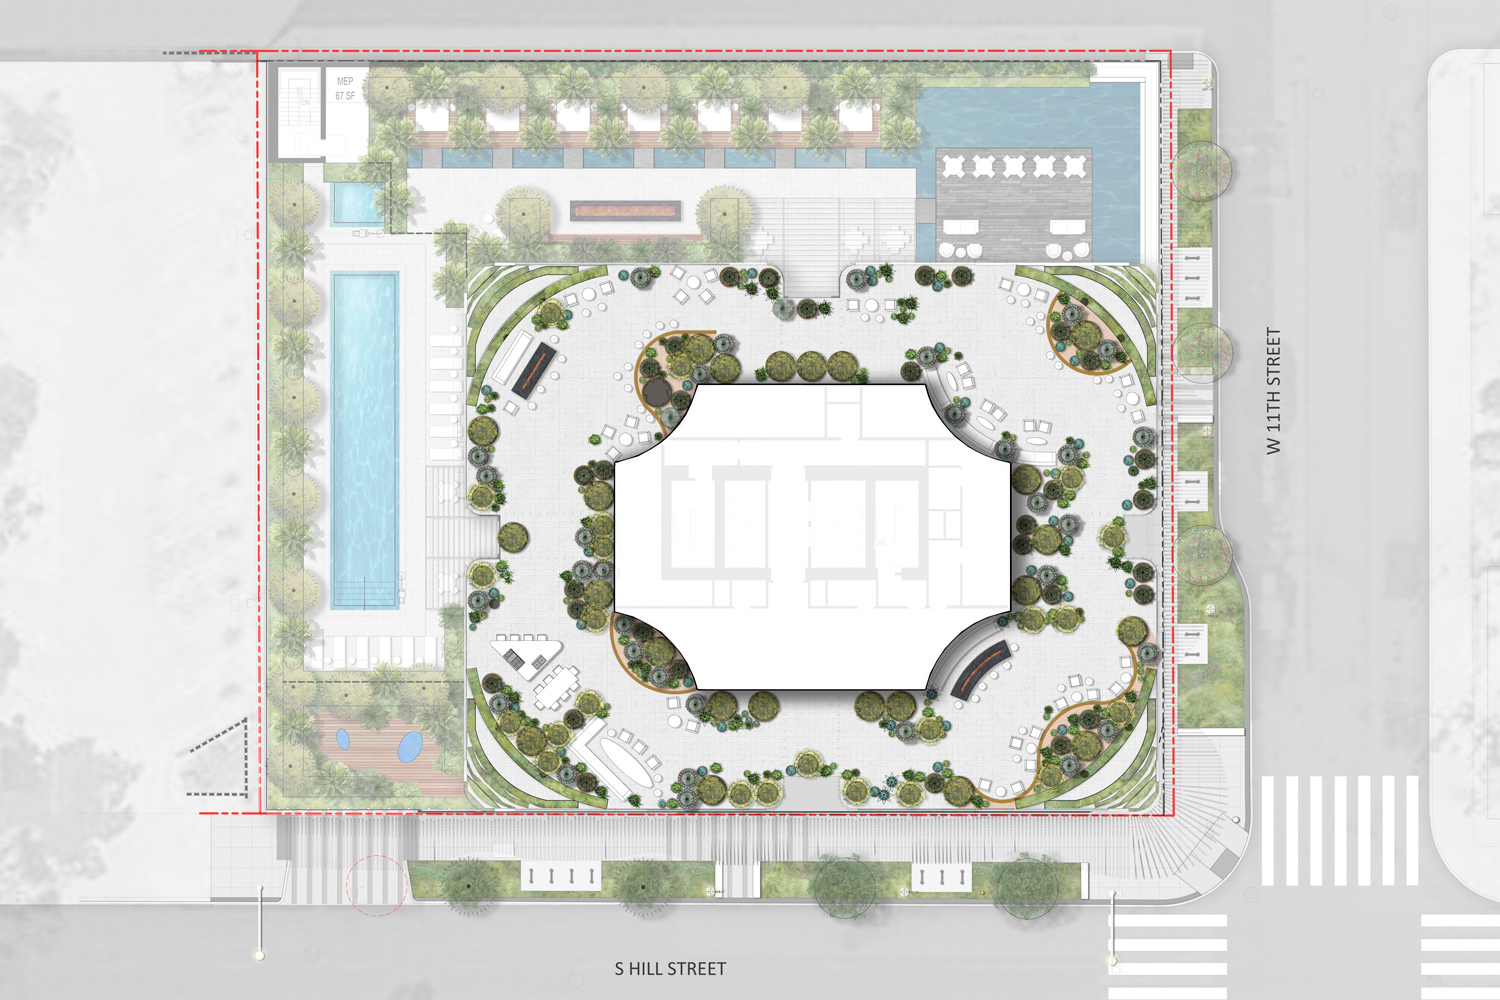 Illustrative site plan of the landscape design at the Sky Trees residential highrise